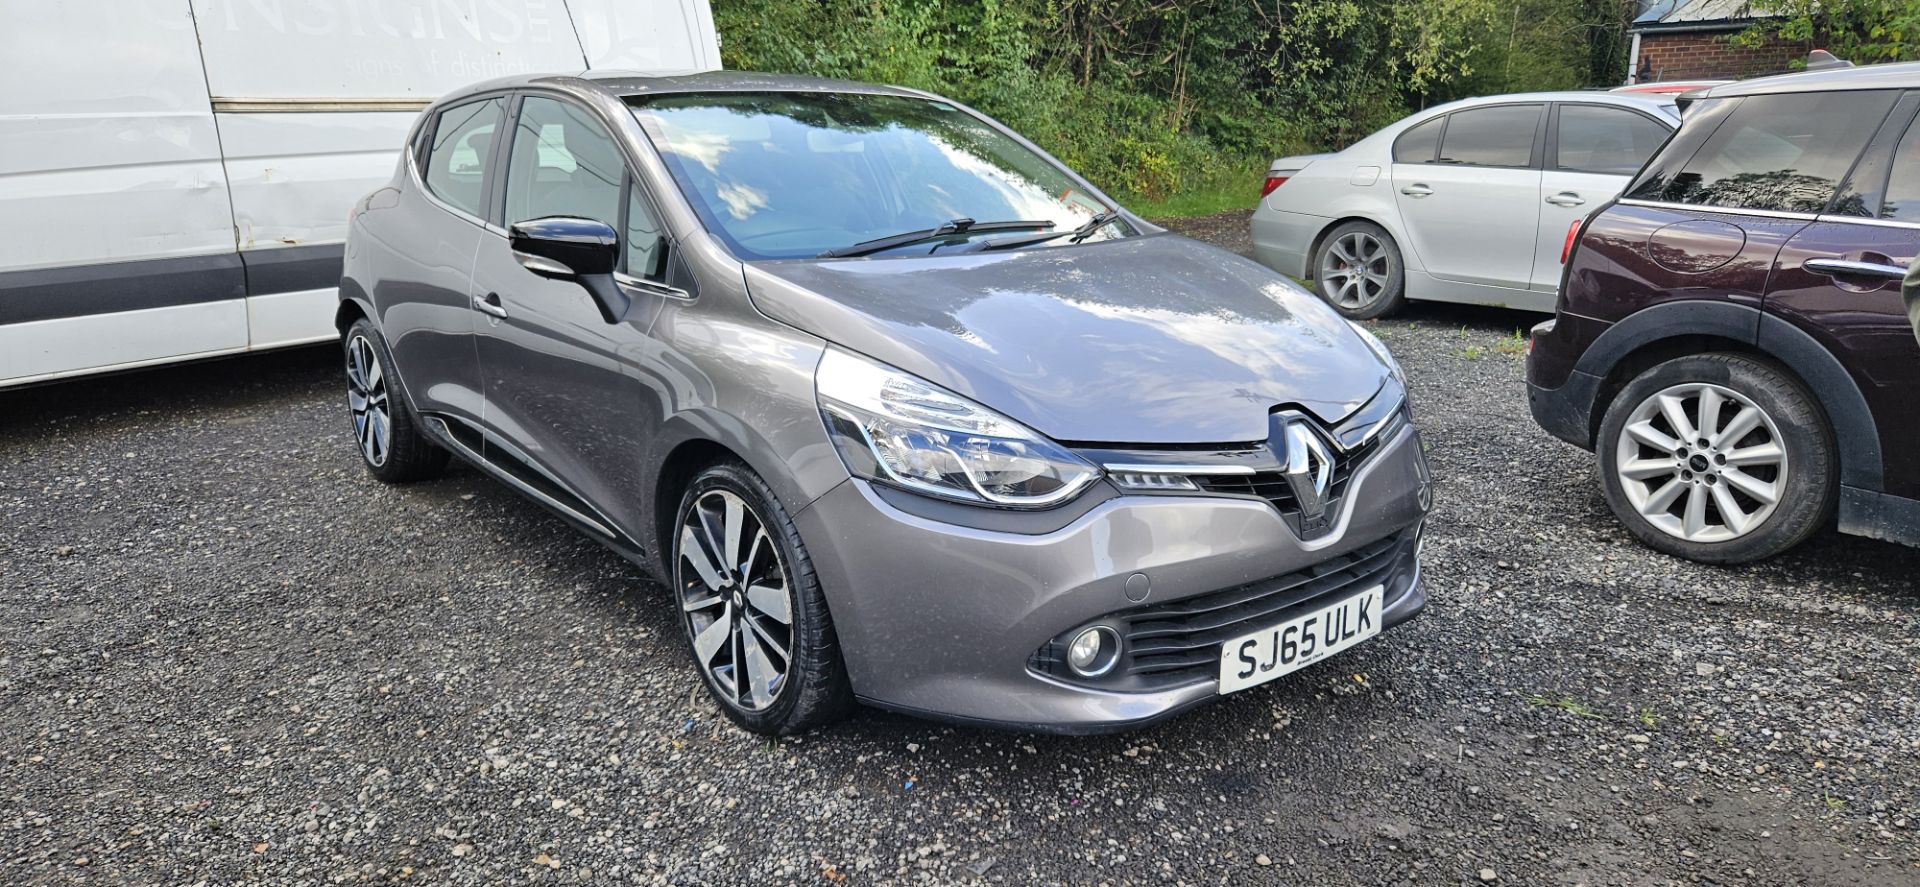 2016 RENAULT CLIO AUTOMATIC - Image 4 of 7